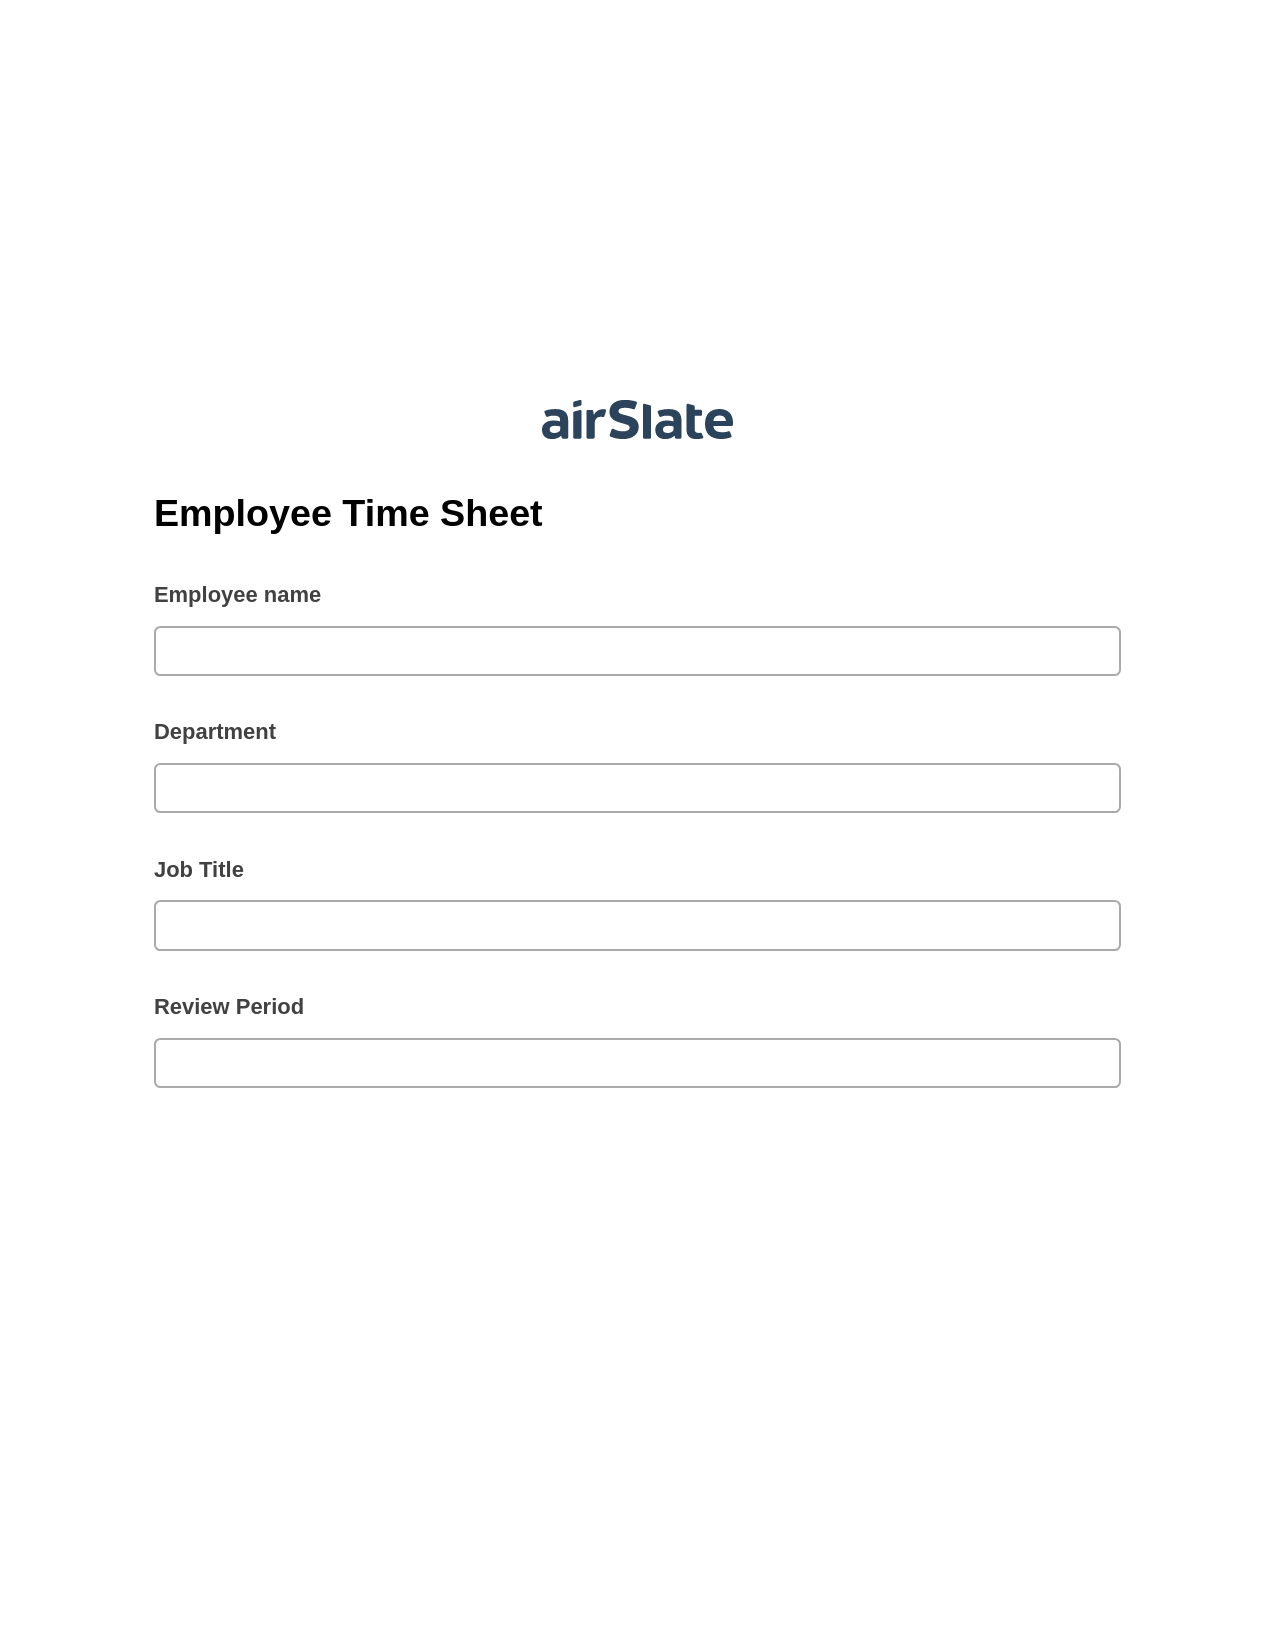 Employee Time Sheet Pre-fill Dropdowns from Airtable, Create slate bot, Archive to Dropbox Bot